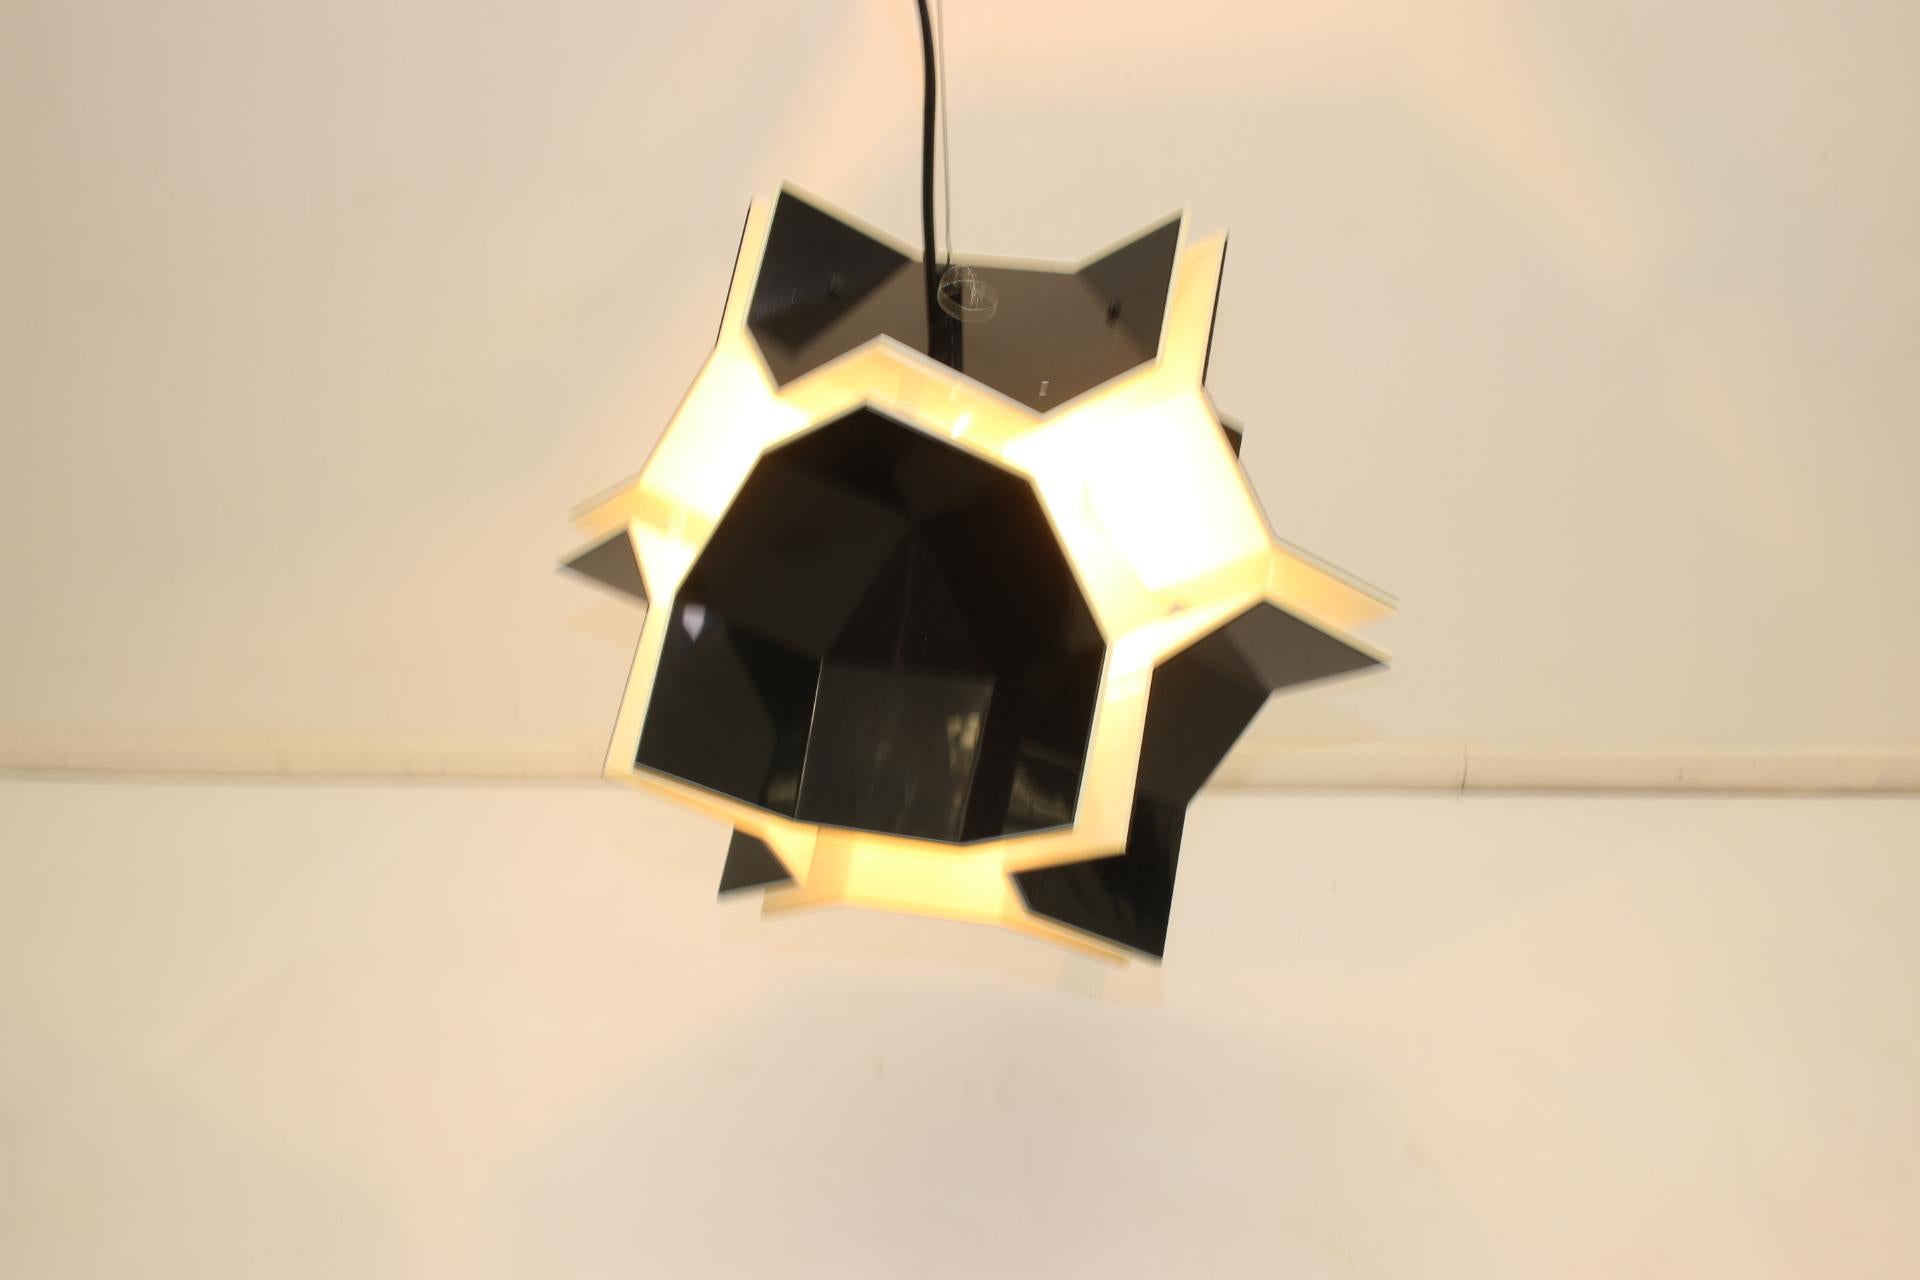 Space Age Acrylic Pendant Lamp by Christophe de Ryck for Dark, 1970s For Sale 8